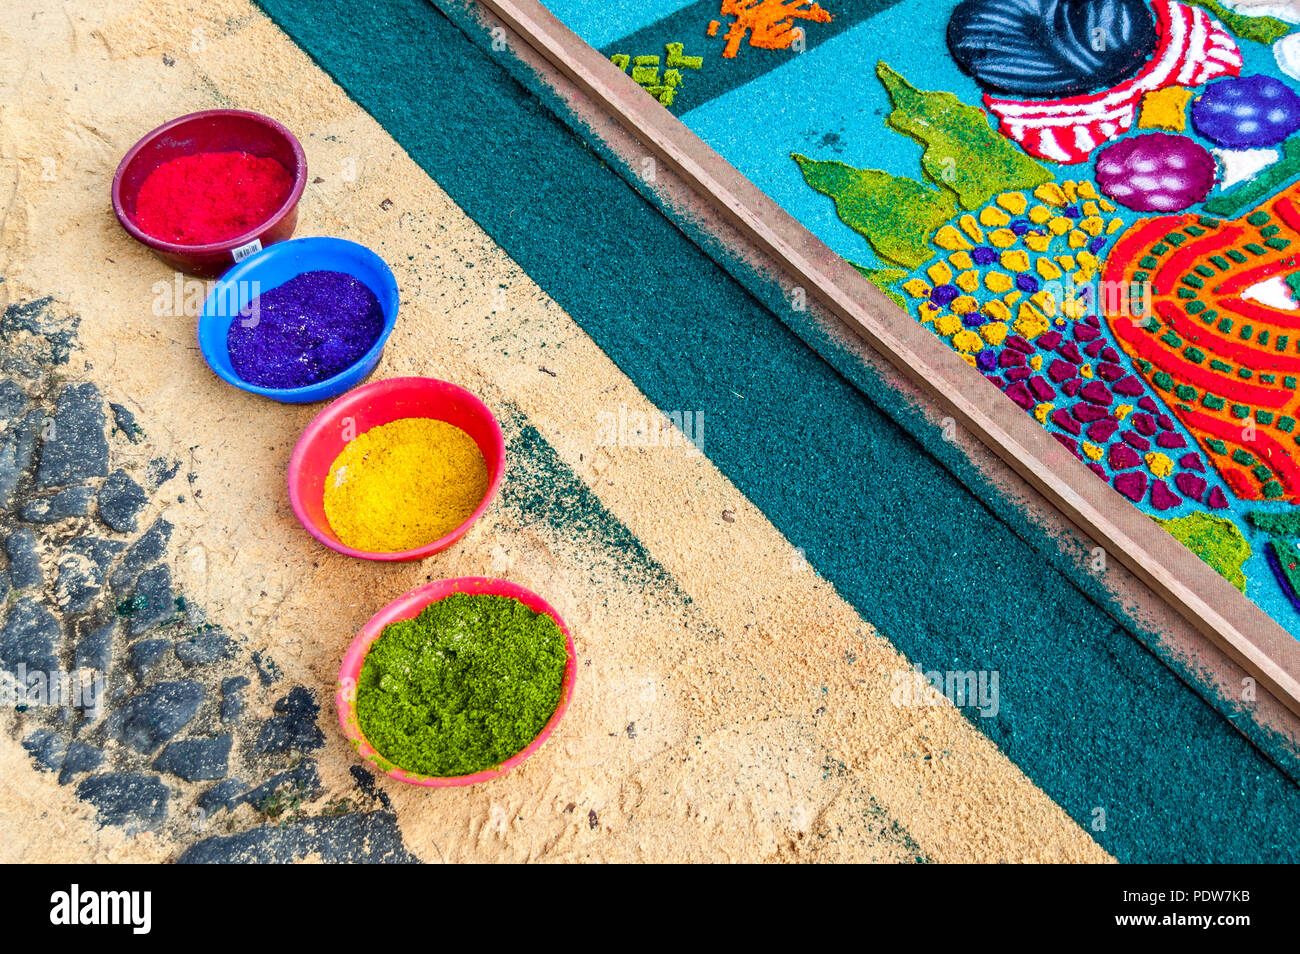 Antigua, Guatemala - April 1, 2012: Making Holy Week procession carpet in UNESCO World Heritage Site with famous Holy Week celebrations. Stock Photo